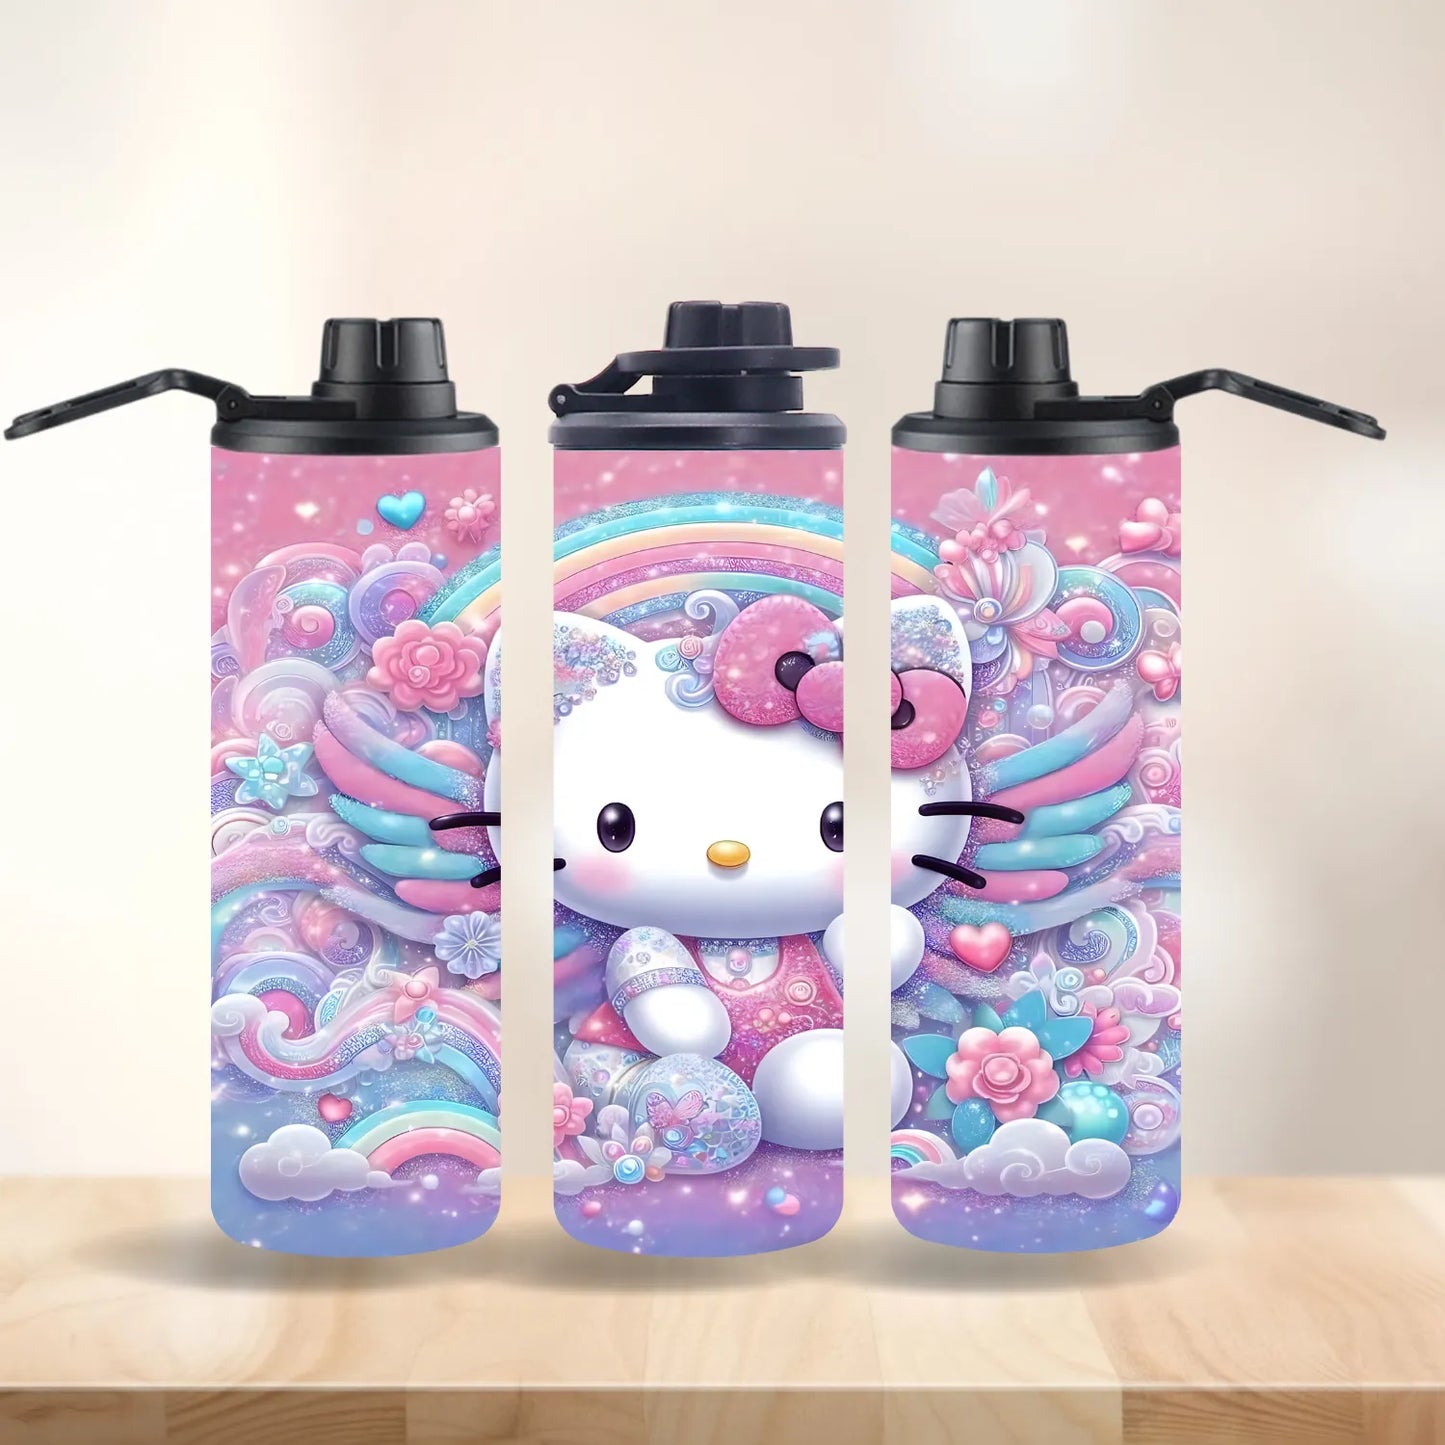 CUSTOMIZABLE HELLO KITTY HOT AND COLD TUMBLER - Crazy Kat Design Co